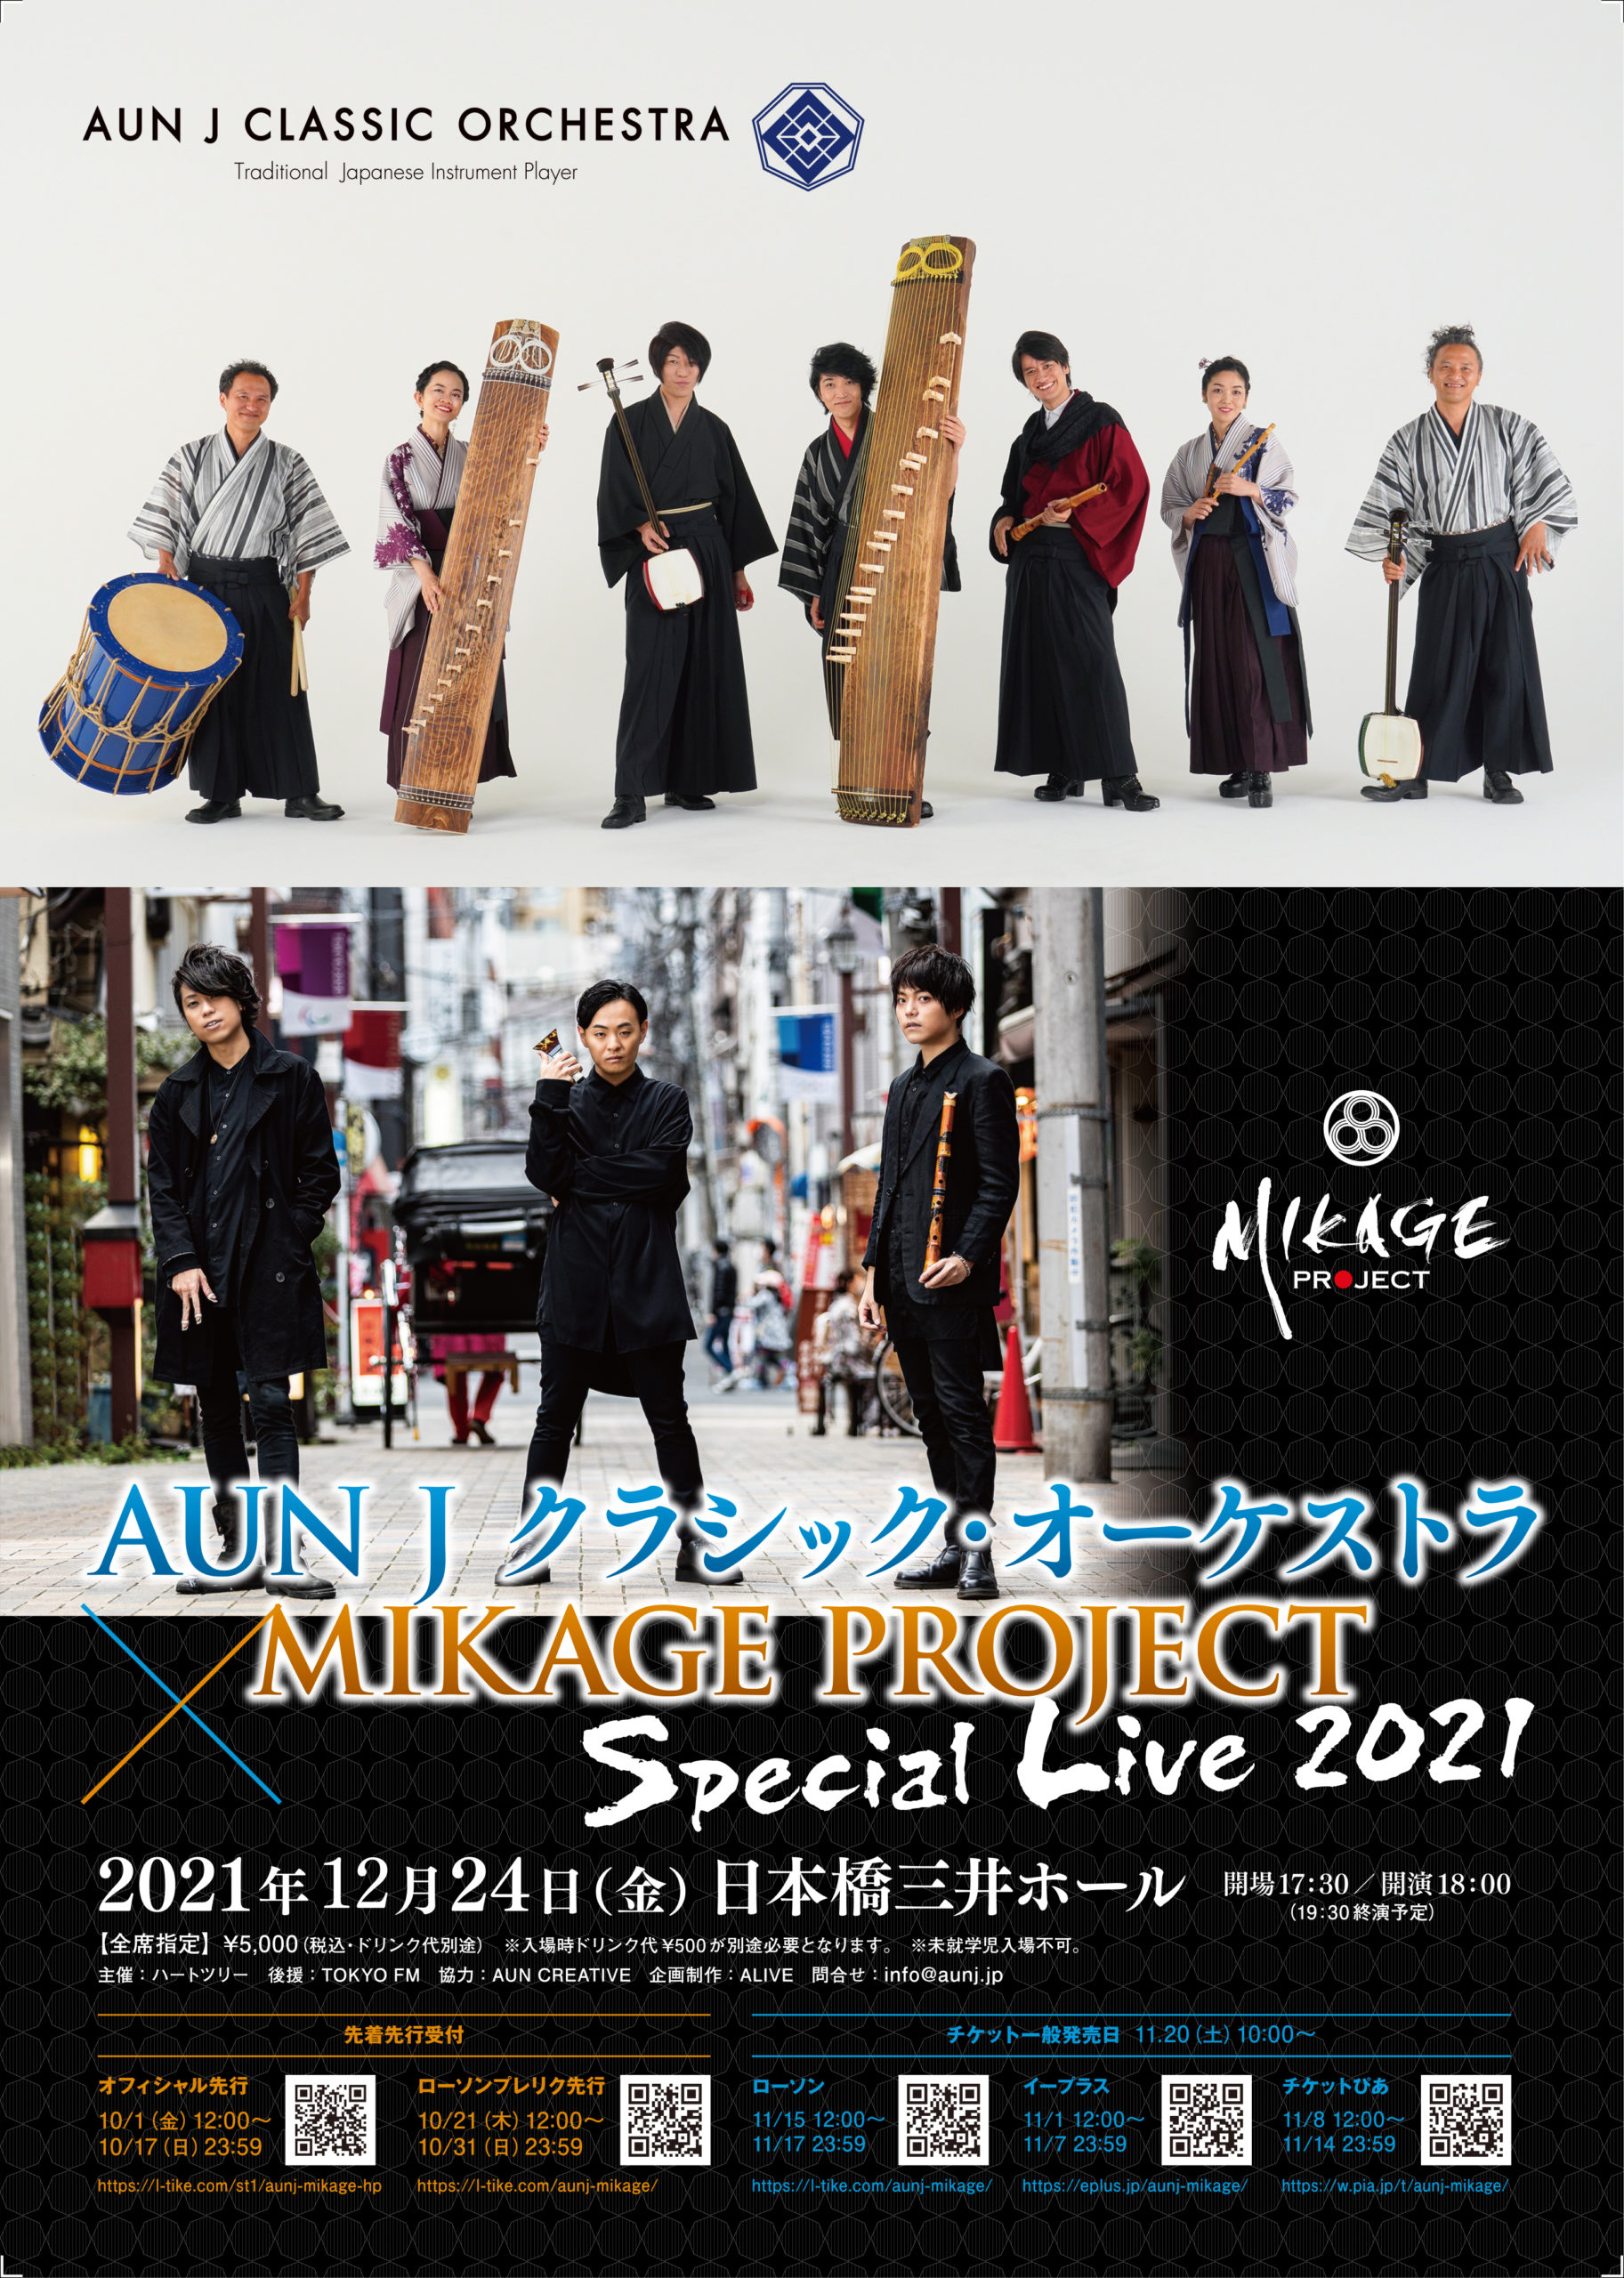 AUN J クラシック・オーケストラ×MIKAGE PROJECT Special Live 2021 - MIKAGE PROJECT  Official Site